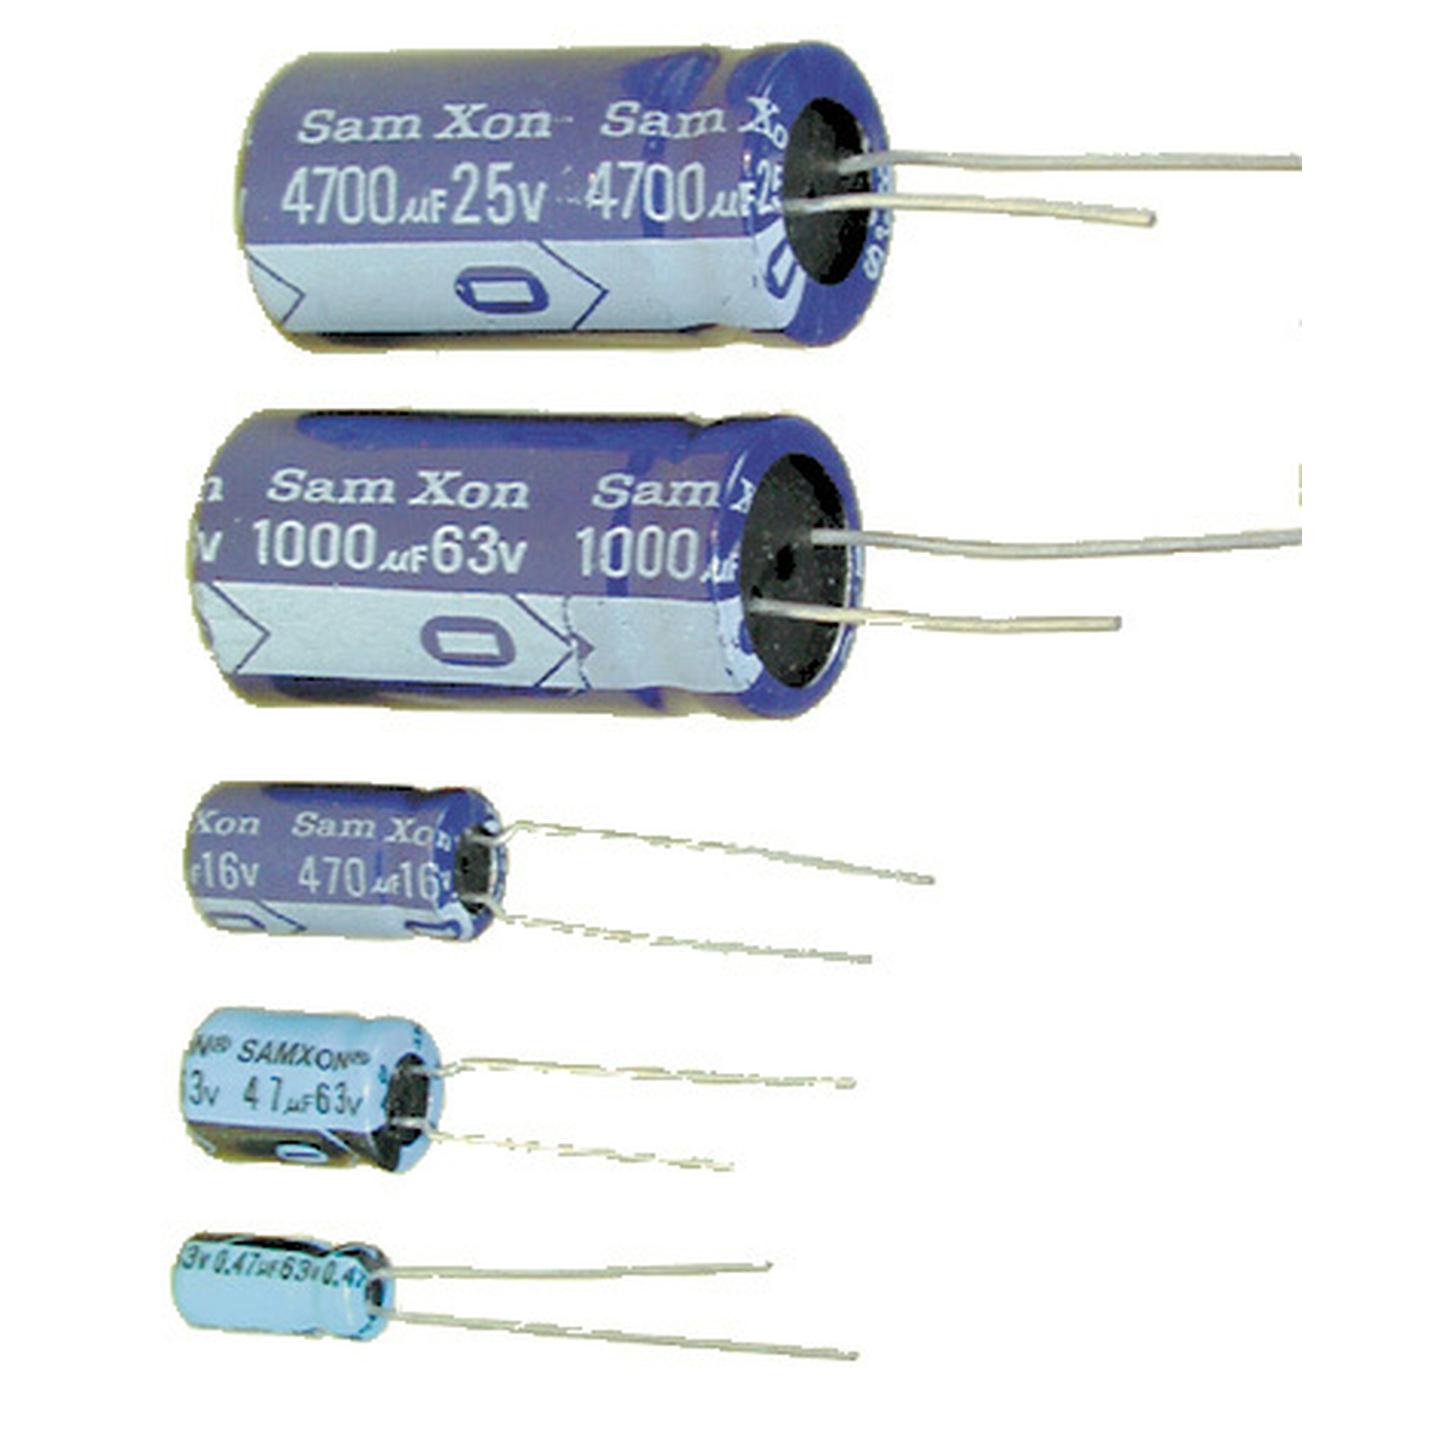 4700uF 25VDC Electrolytic RB Capacitor